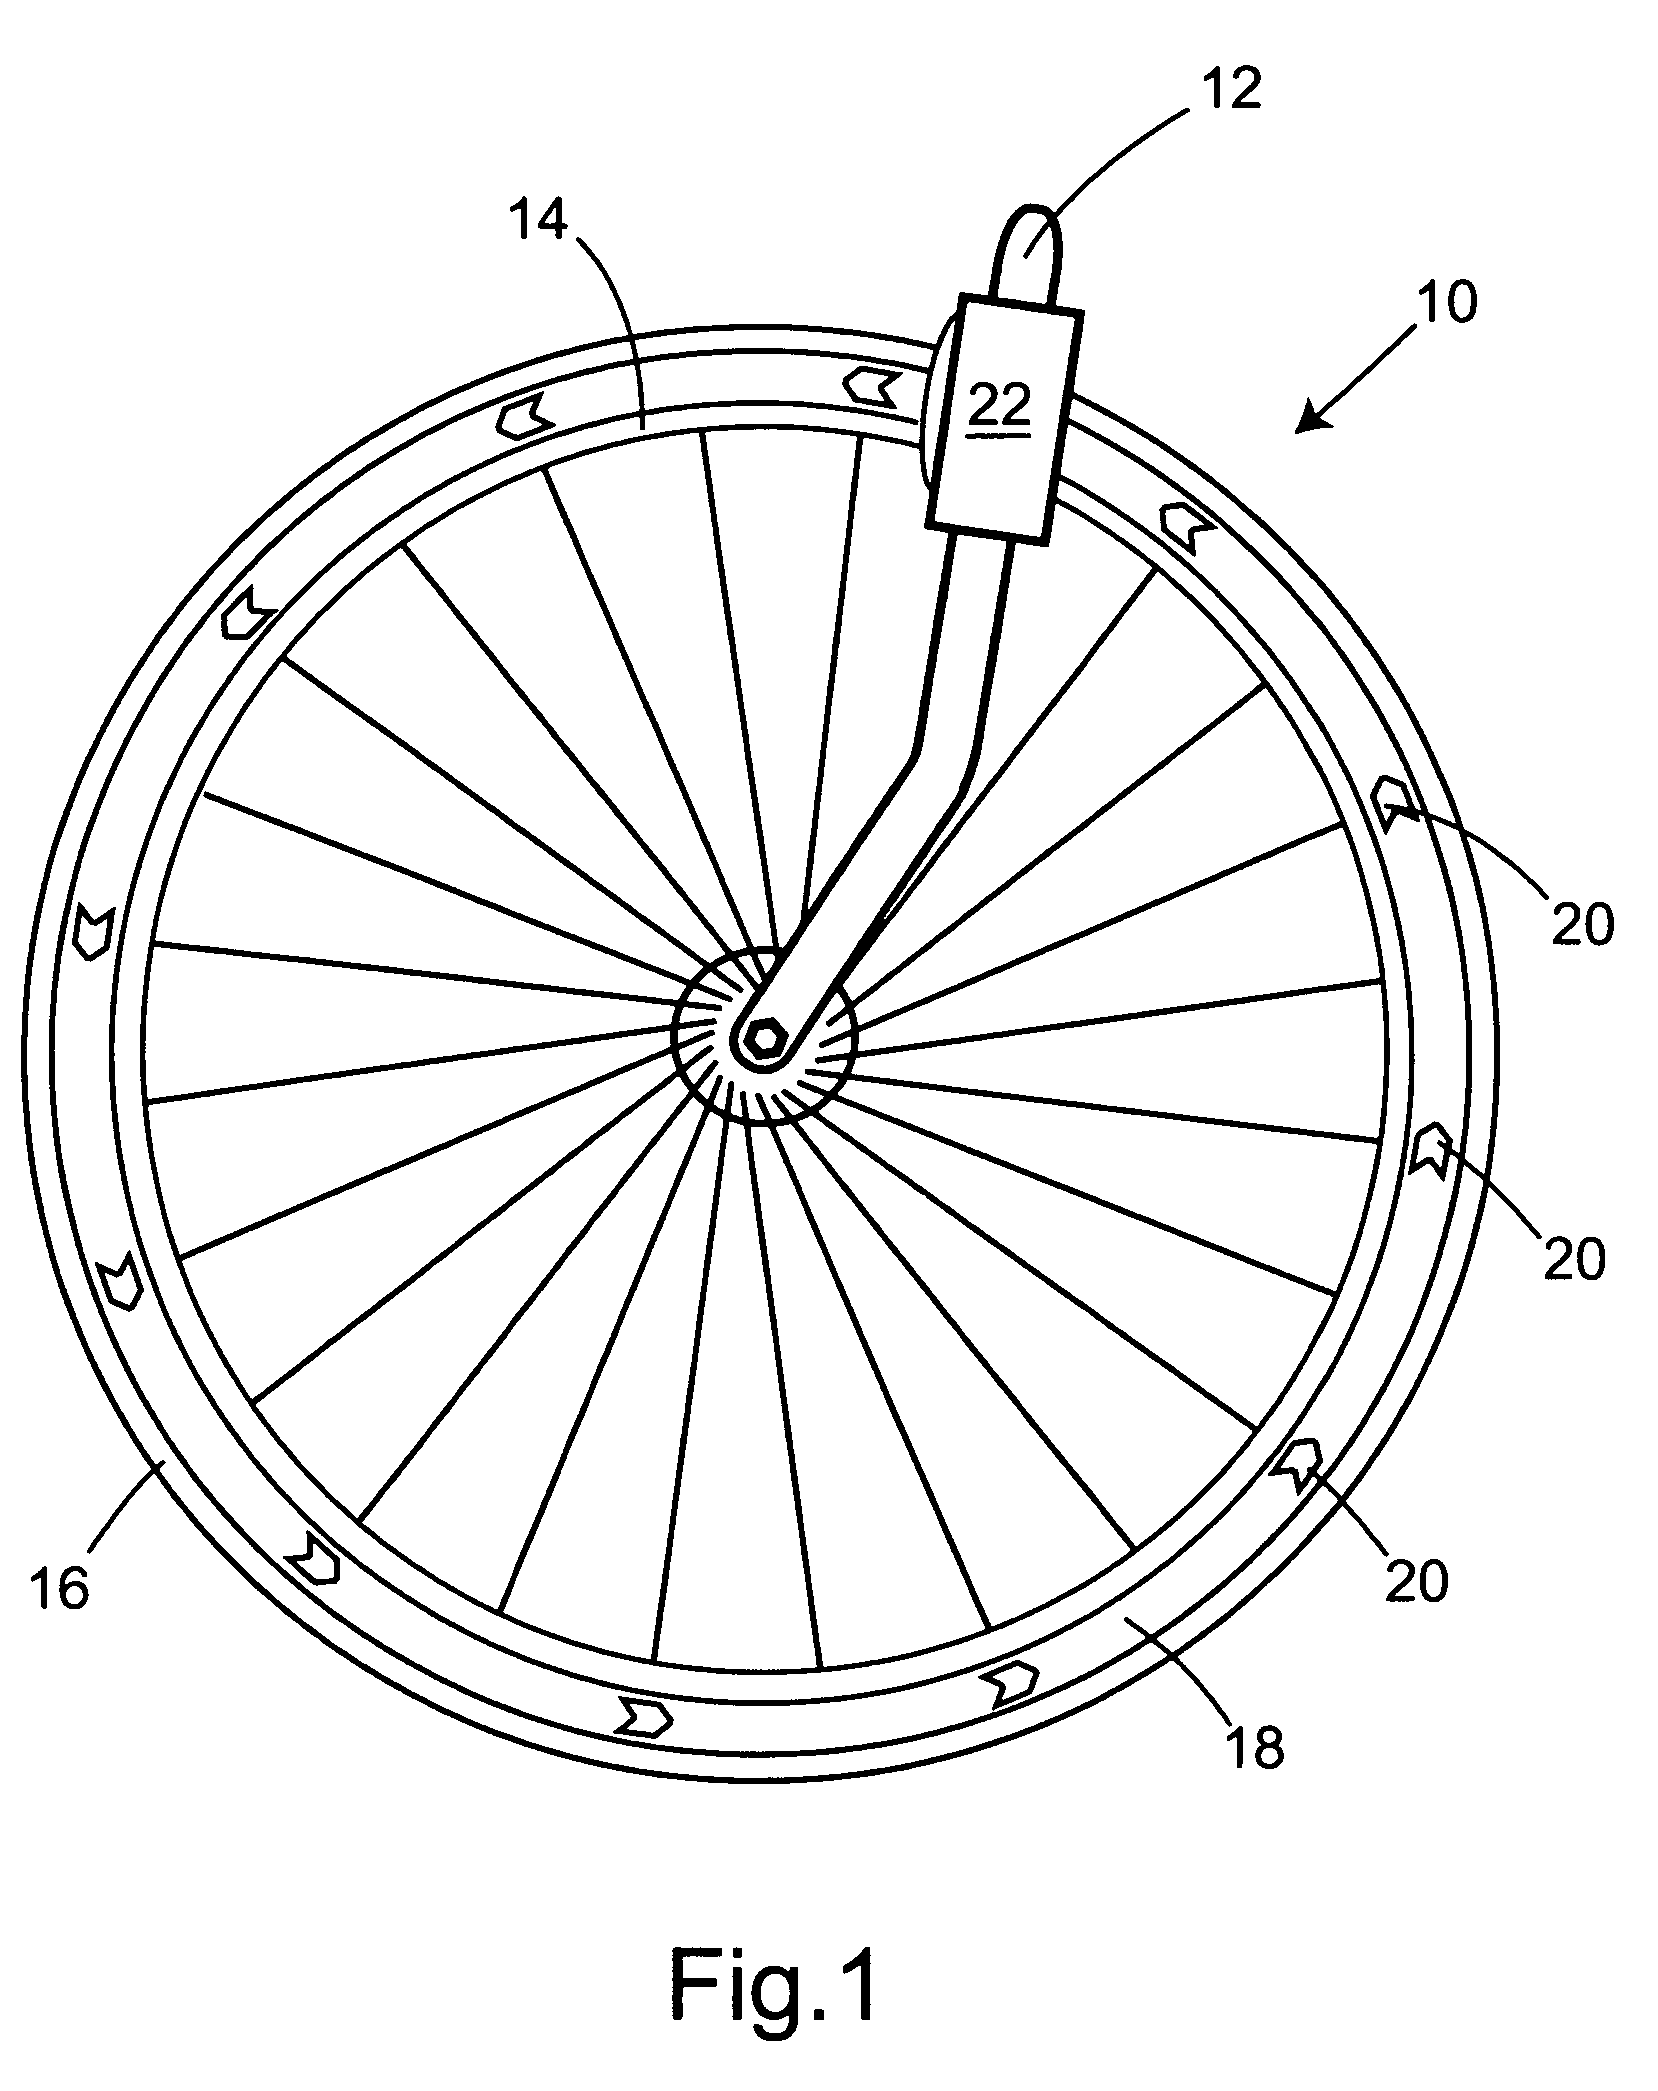 Human powered vehicle safety lighting structures